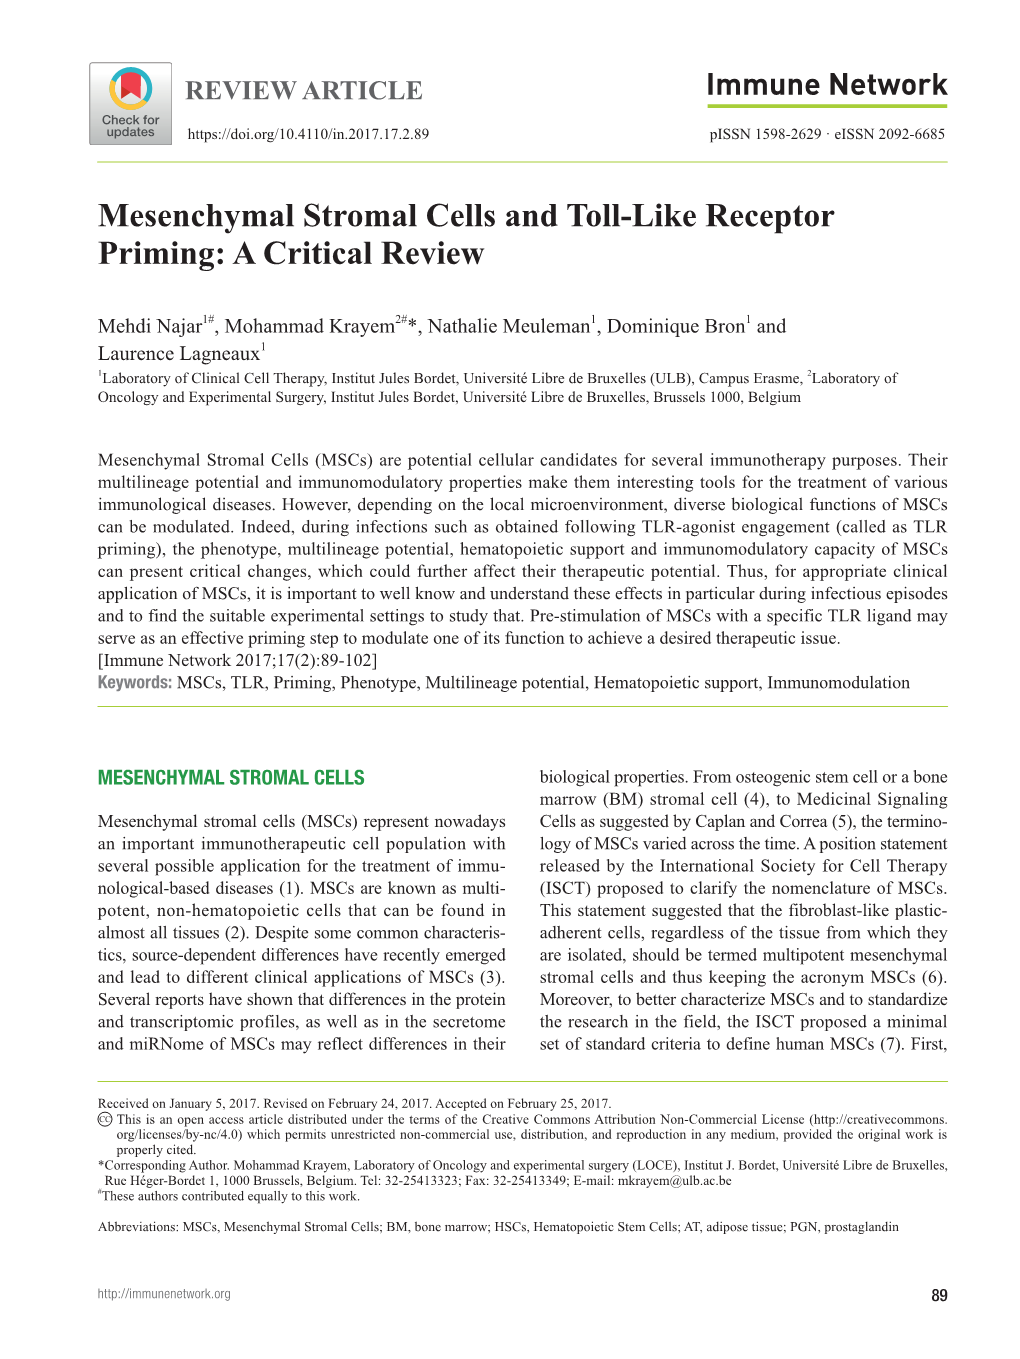 Mesenchymal Stromal Cells and Toll-Like Receptor Priming: a Critical Review